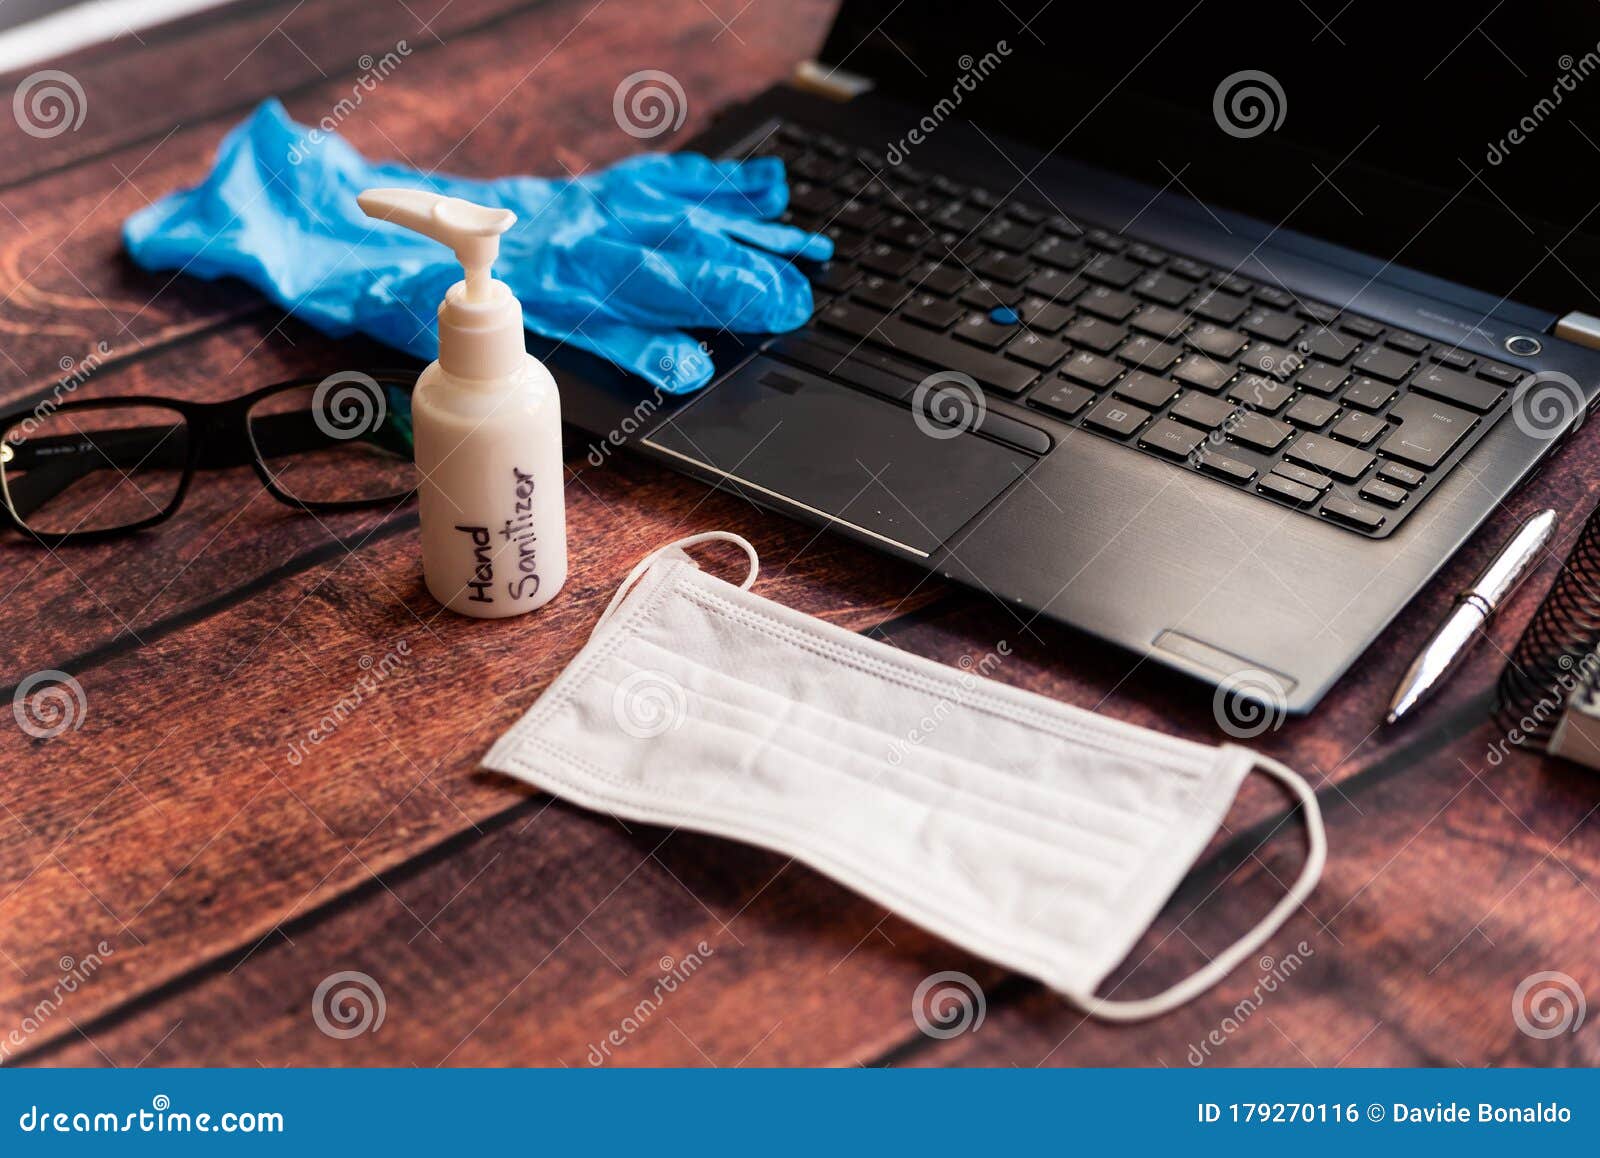 remote work kit on wooden office desk with hand sanitizer and face mask, a solution against the spread of corona virus for